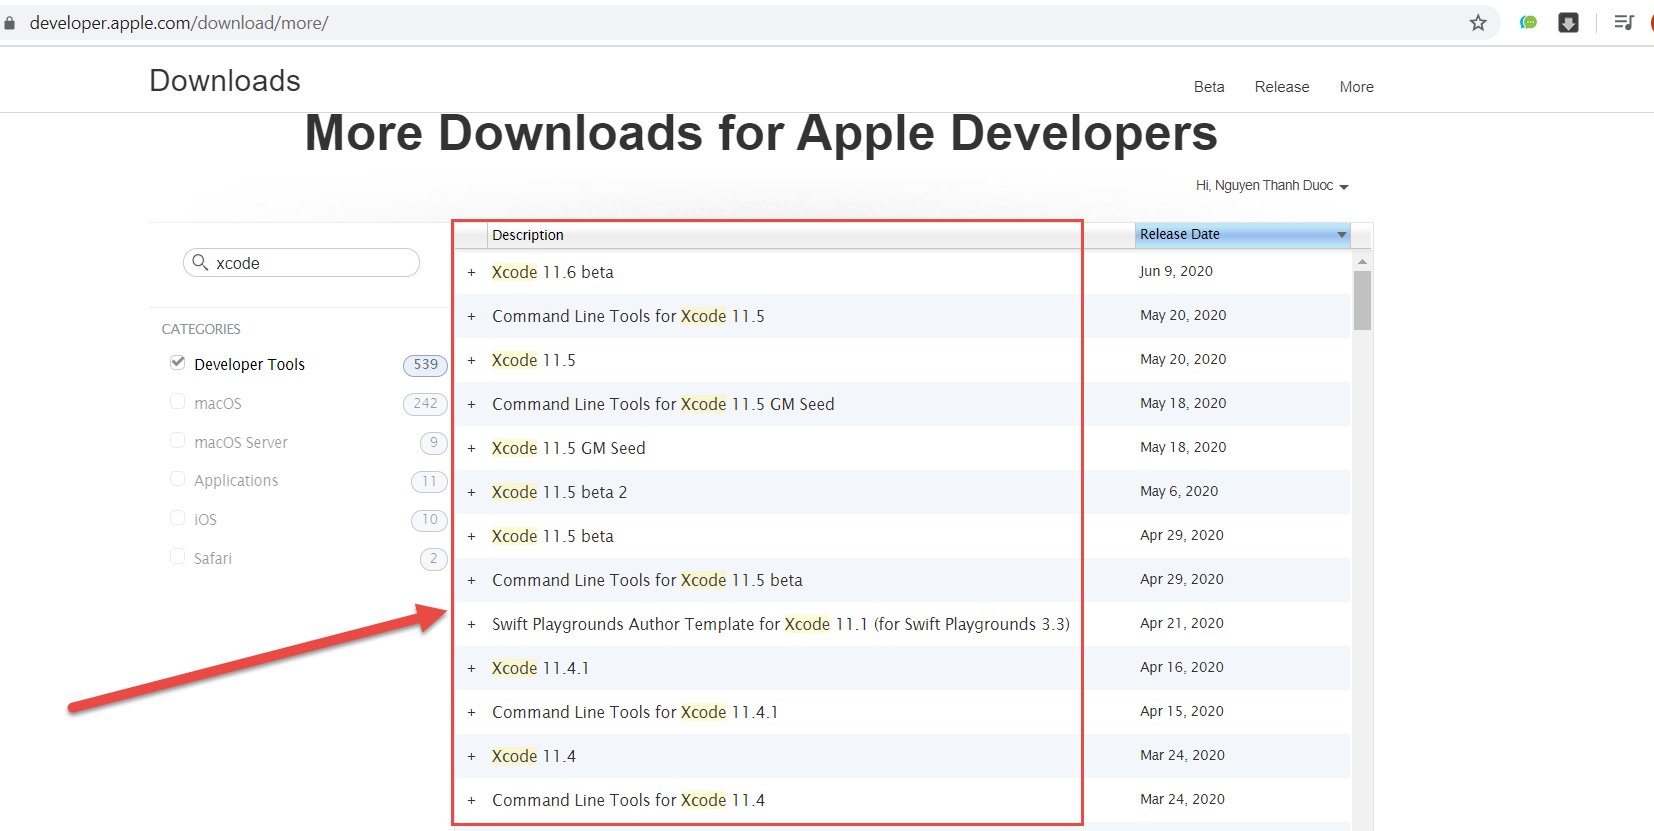 install xcode versions